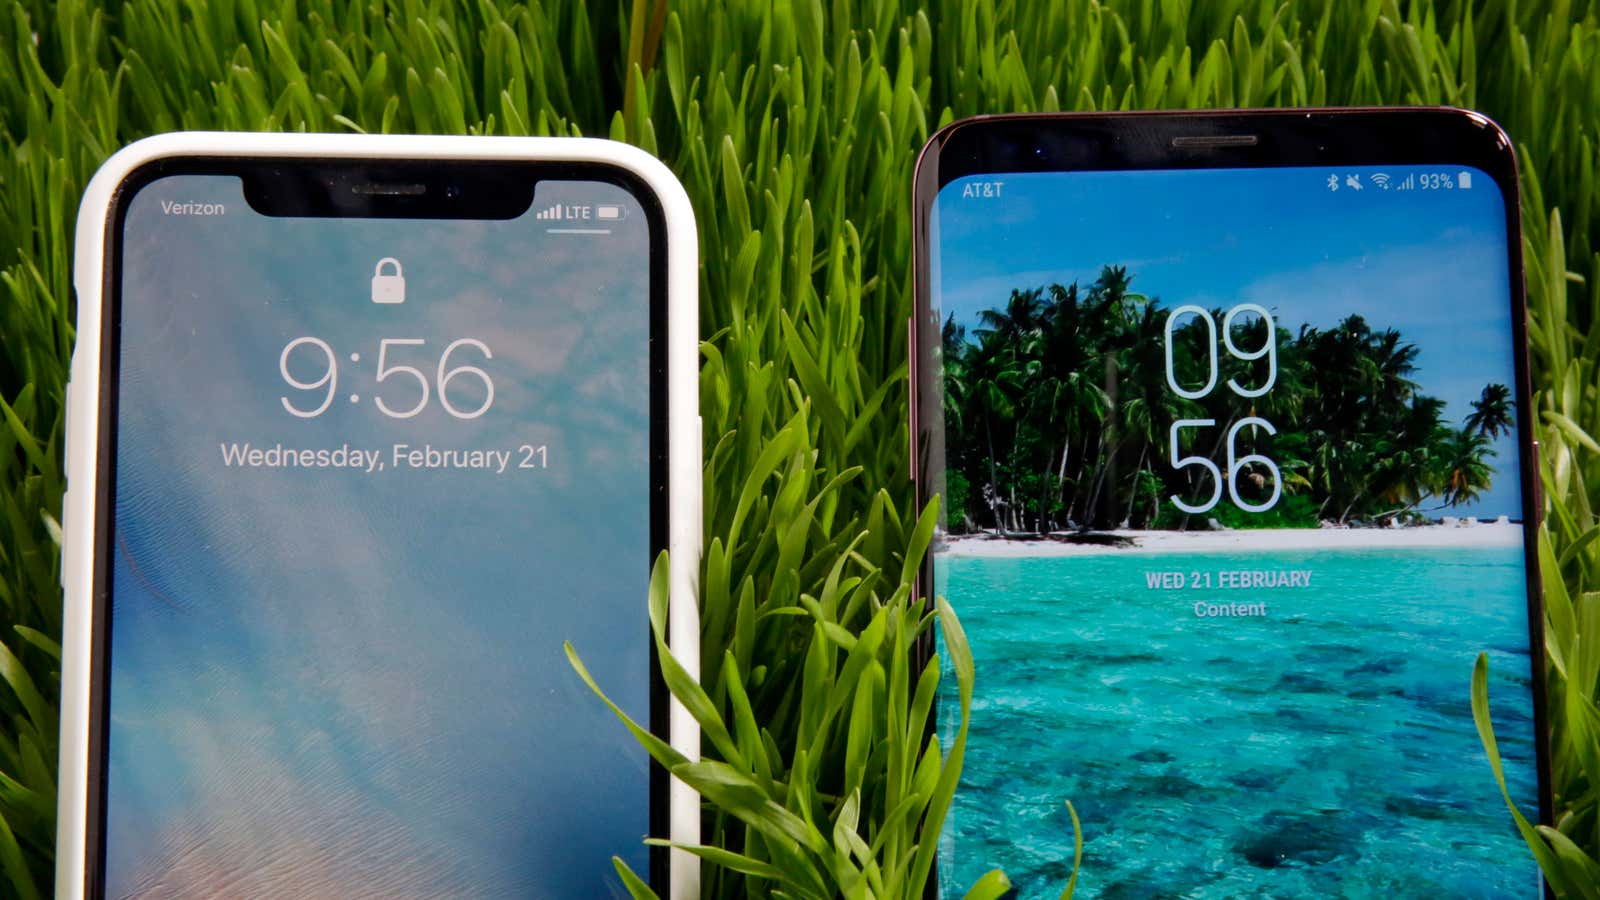 Samsung Galaxy S10 vs S9: what's the difference?